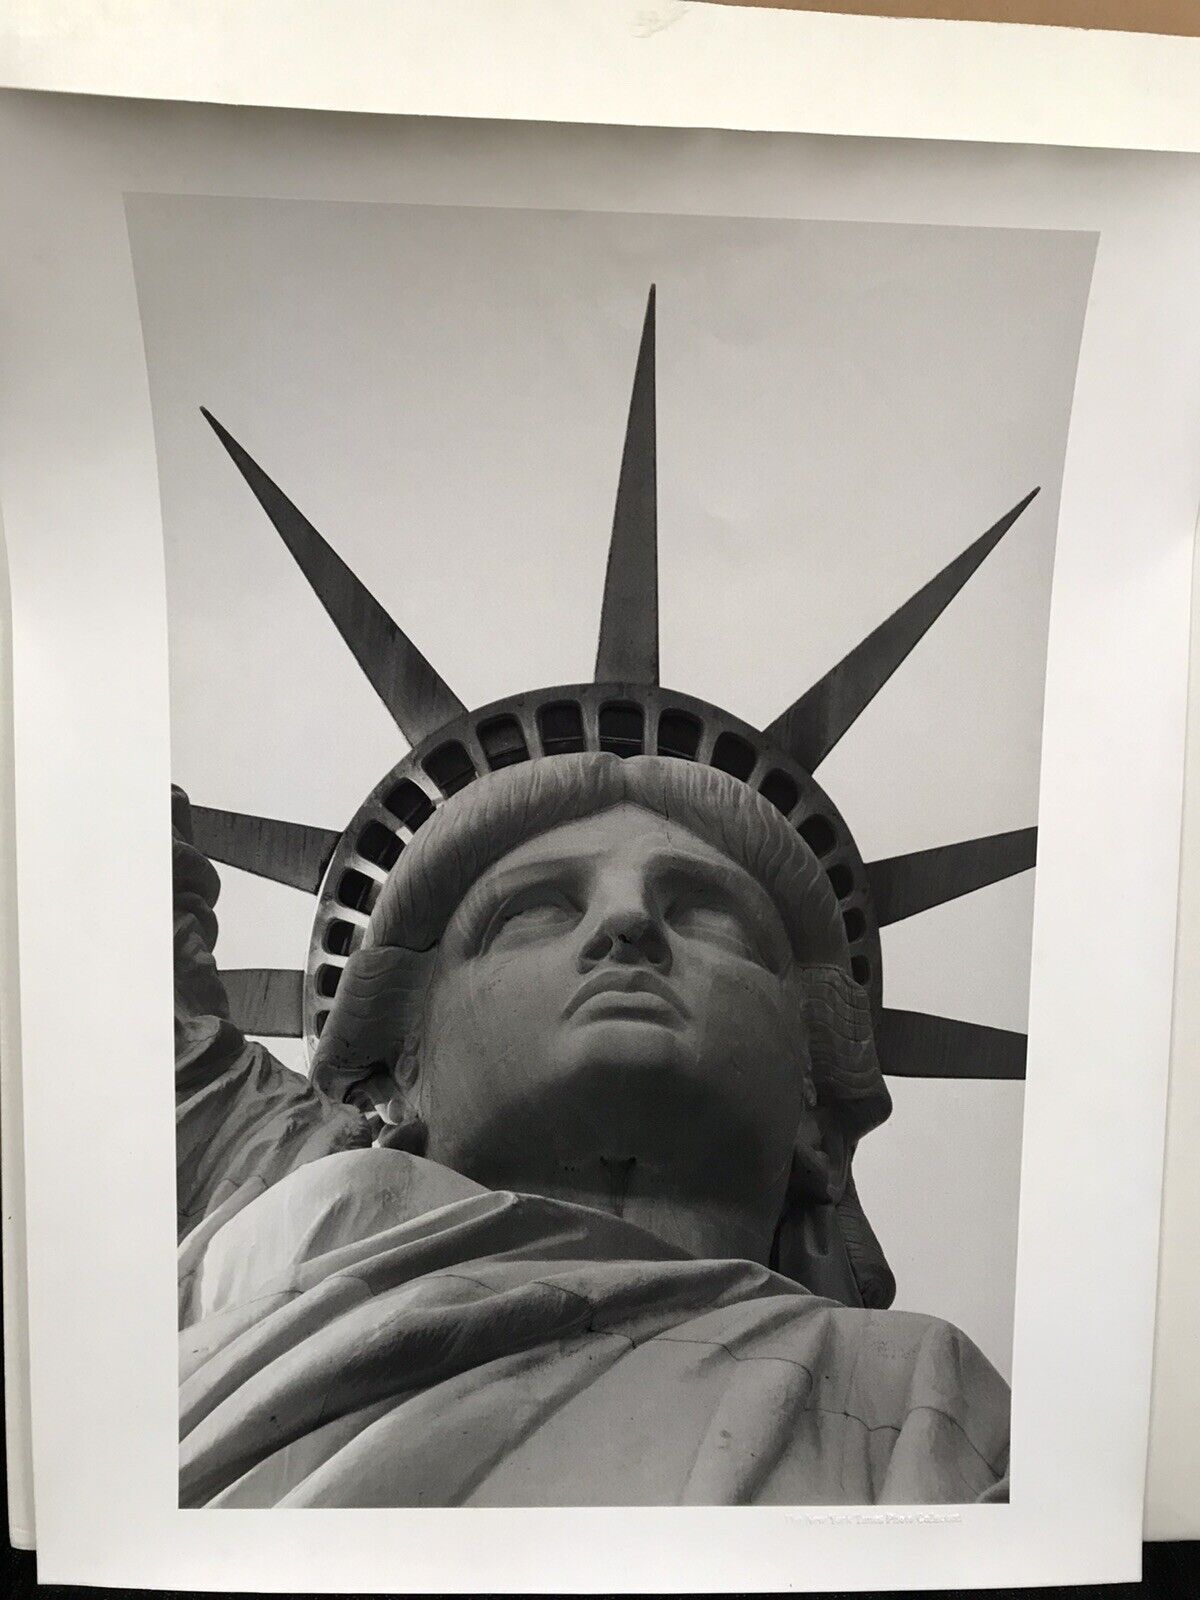 Vintage Face of Liberty Original Photo Print by Eddie Hausner Unframed 16x20 NEW